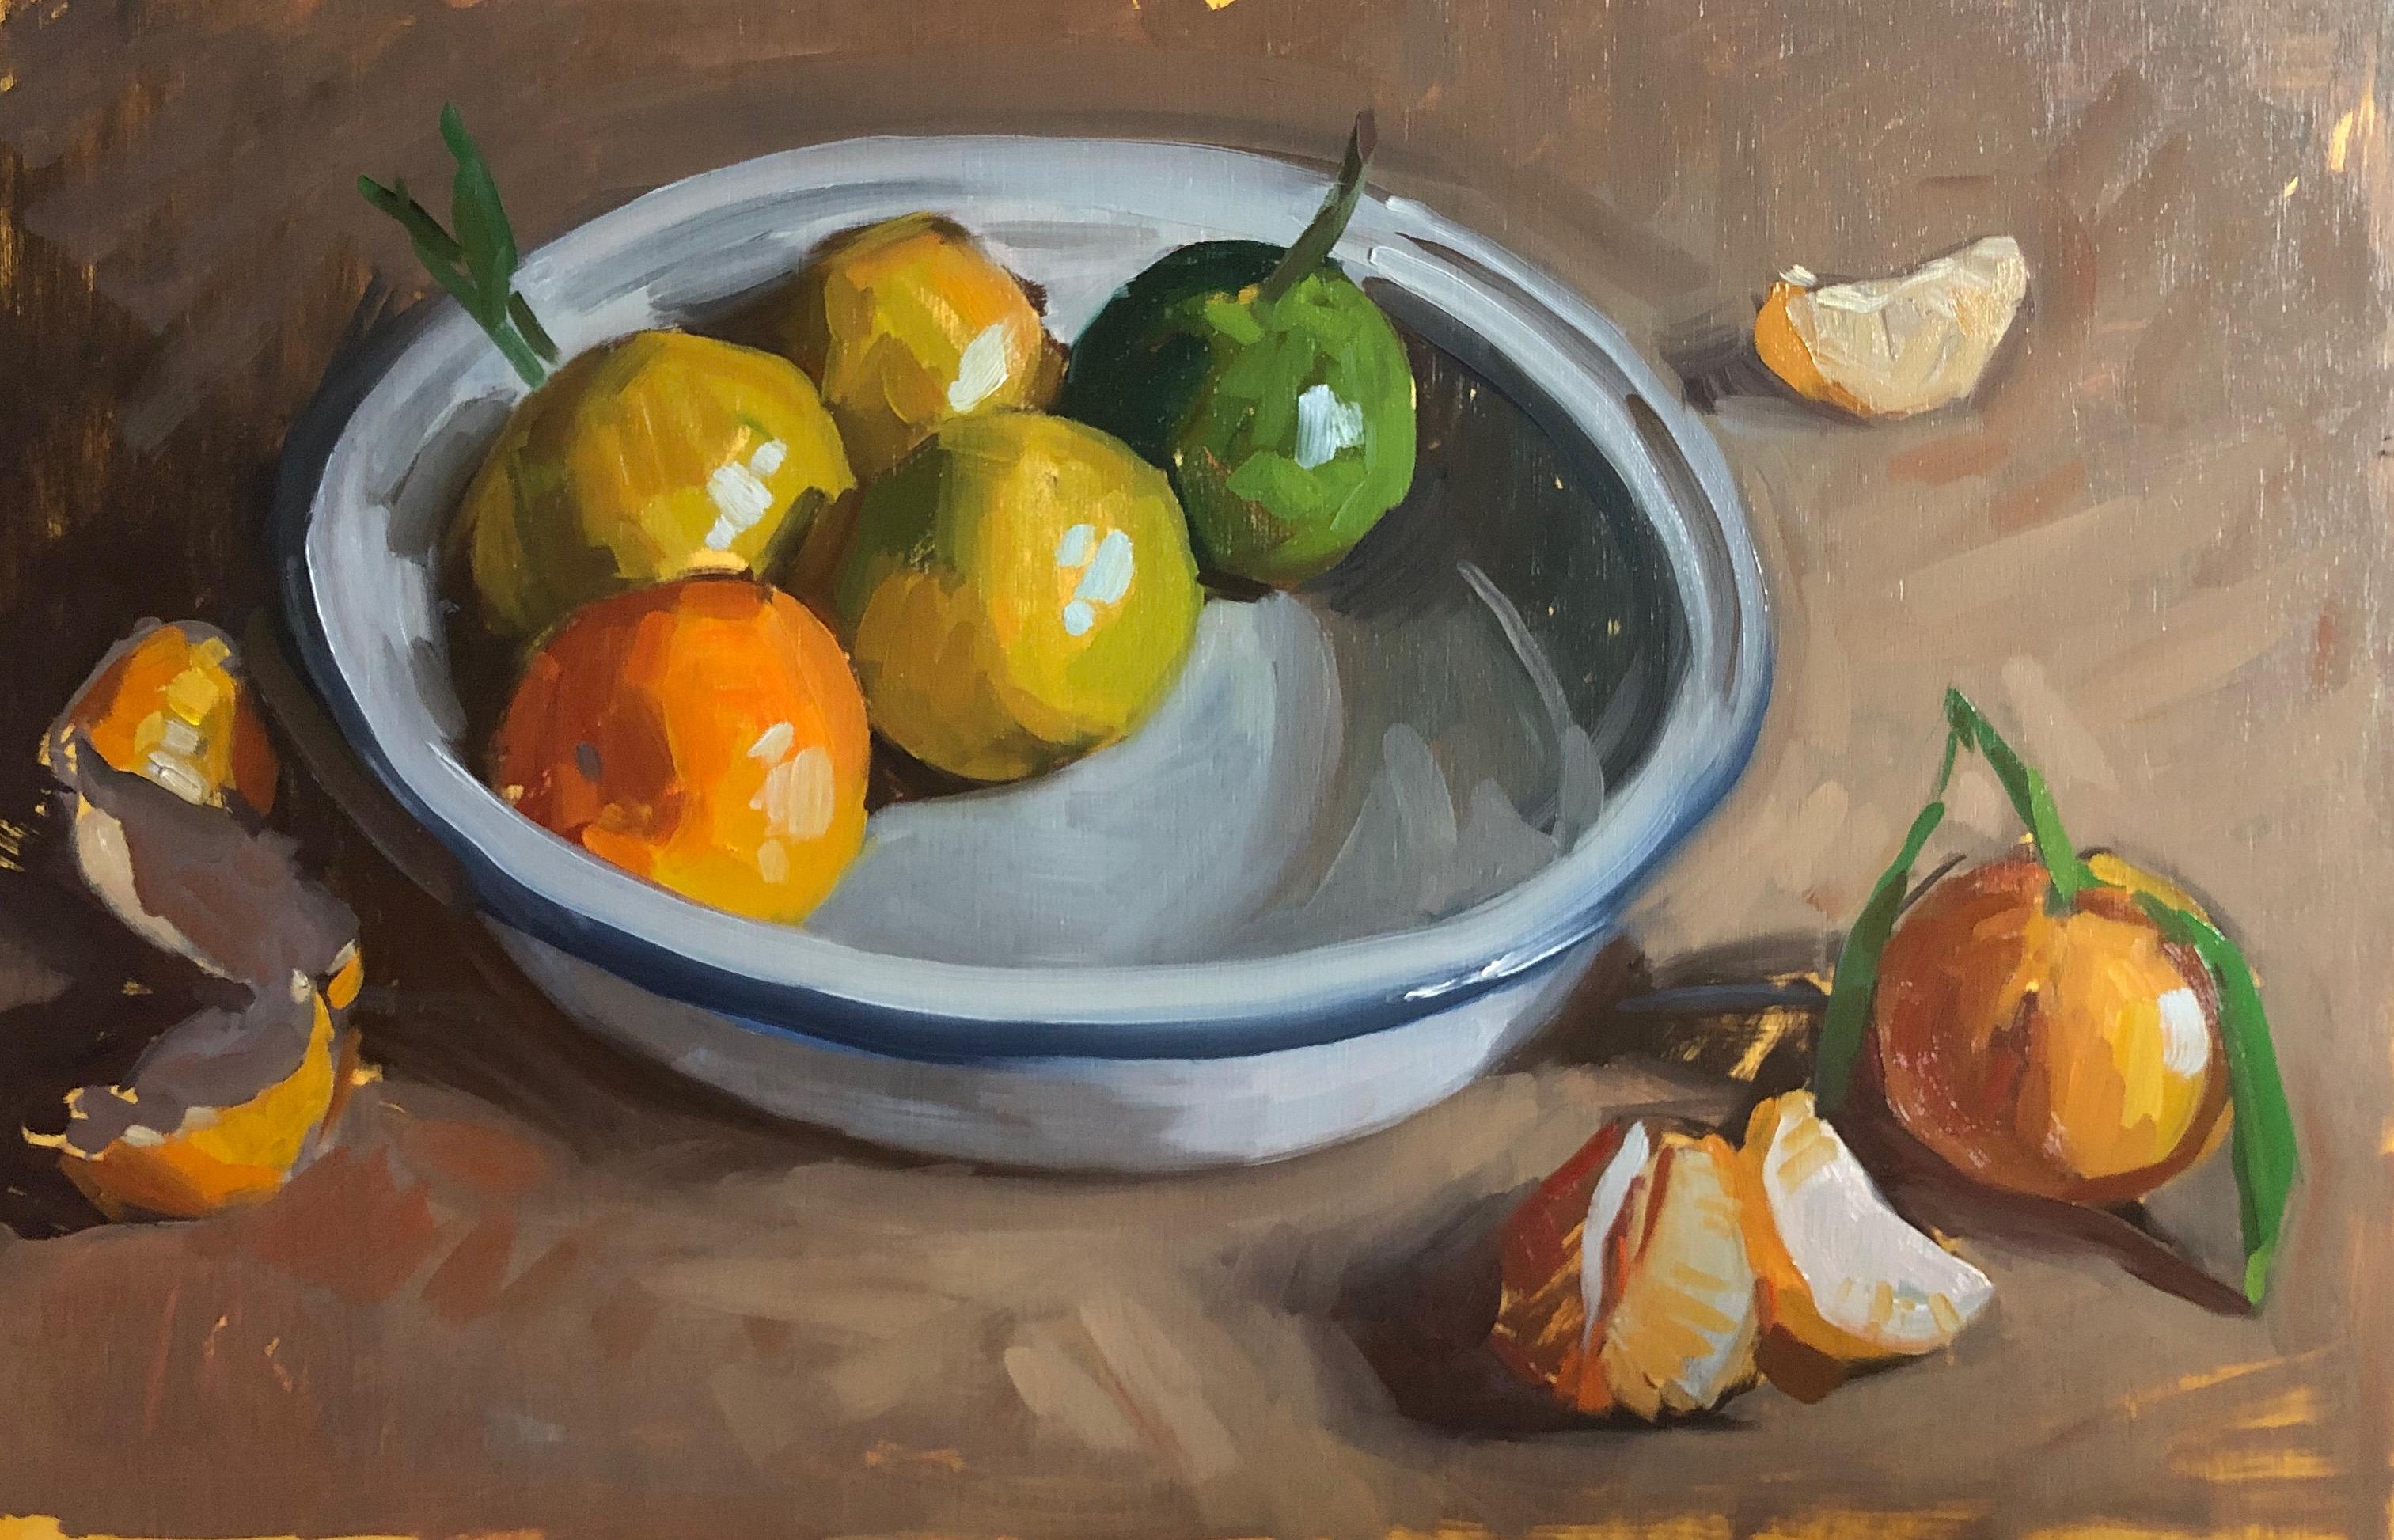 "Clementines" impressionist still life orange, yellow and green